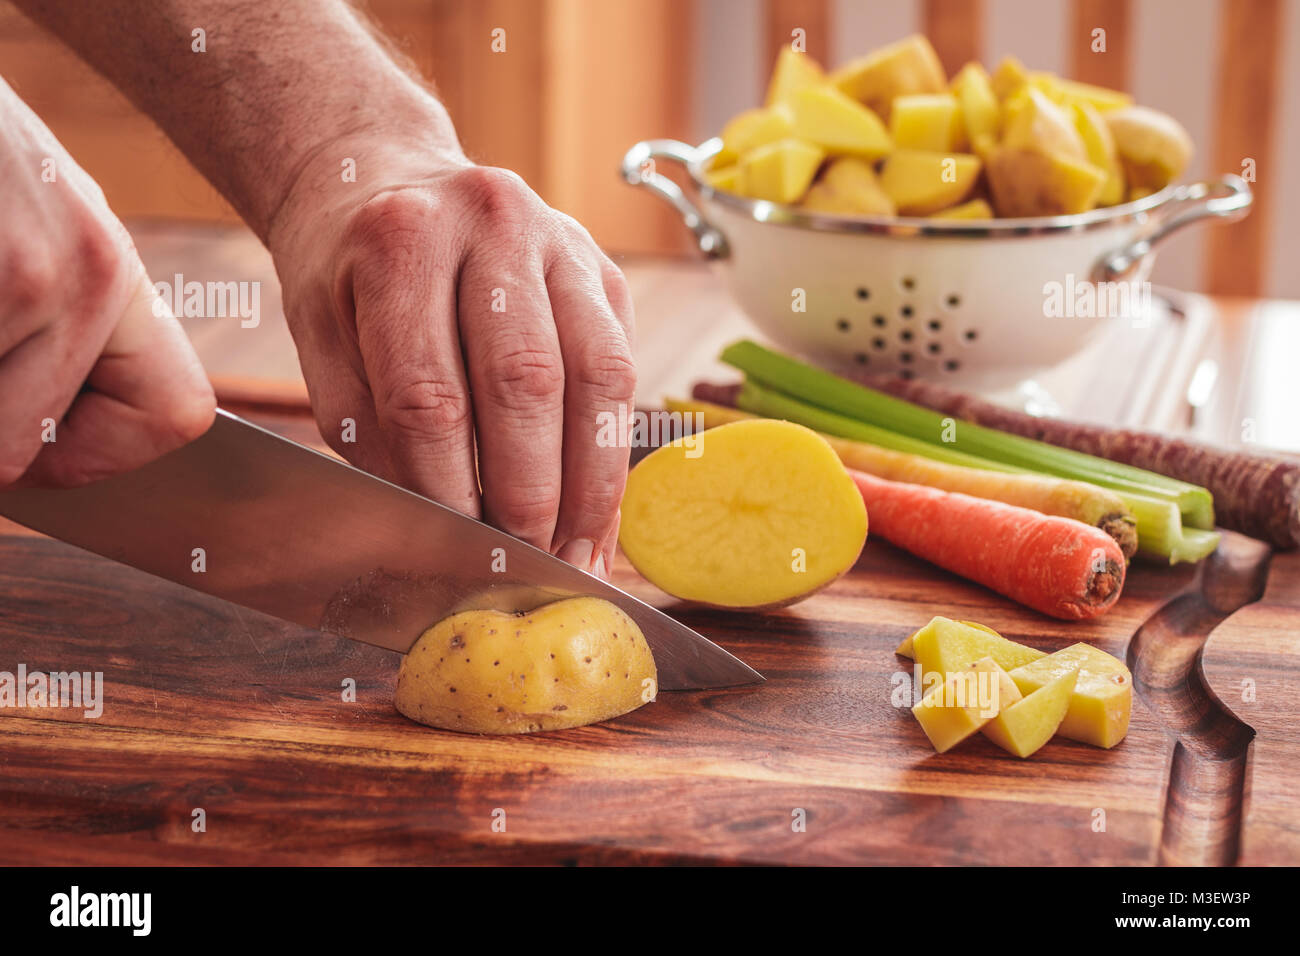 Chopping potatoes for homemade chicken and white bean soup.  Ingredients include potatoes, carrots, and celery. Stock Photo